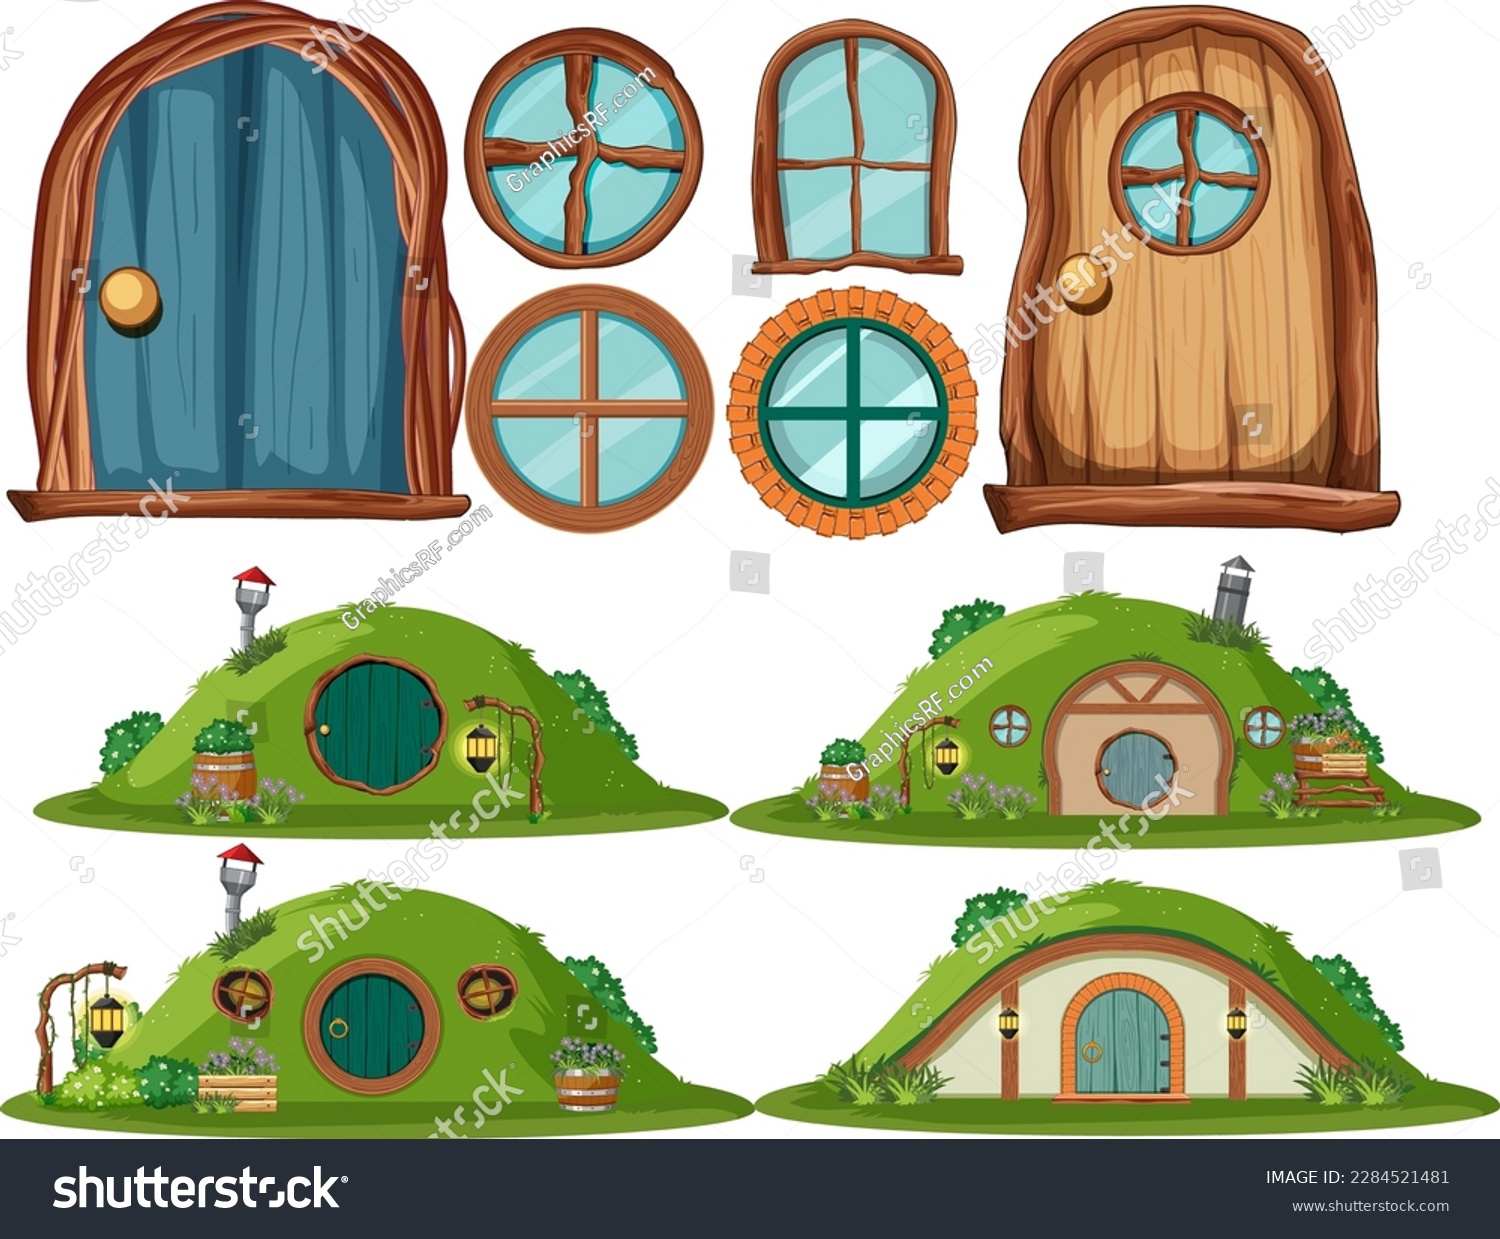 SVG of Set of hobbit house with seperate door and window illustration svg